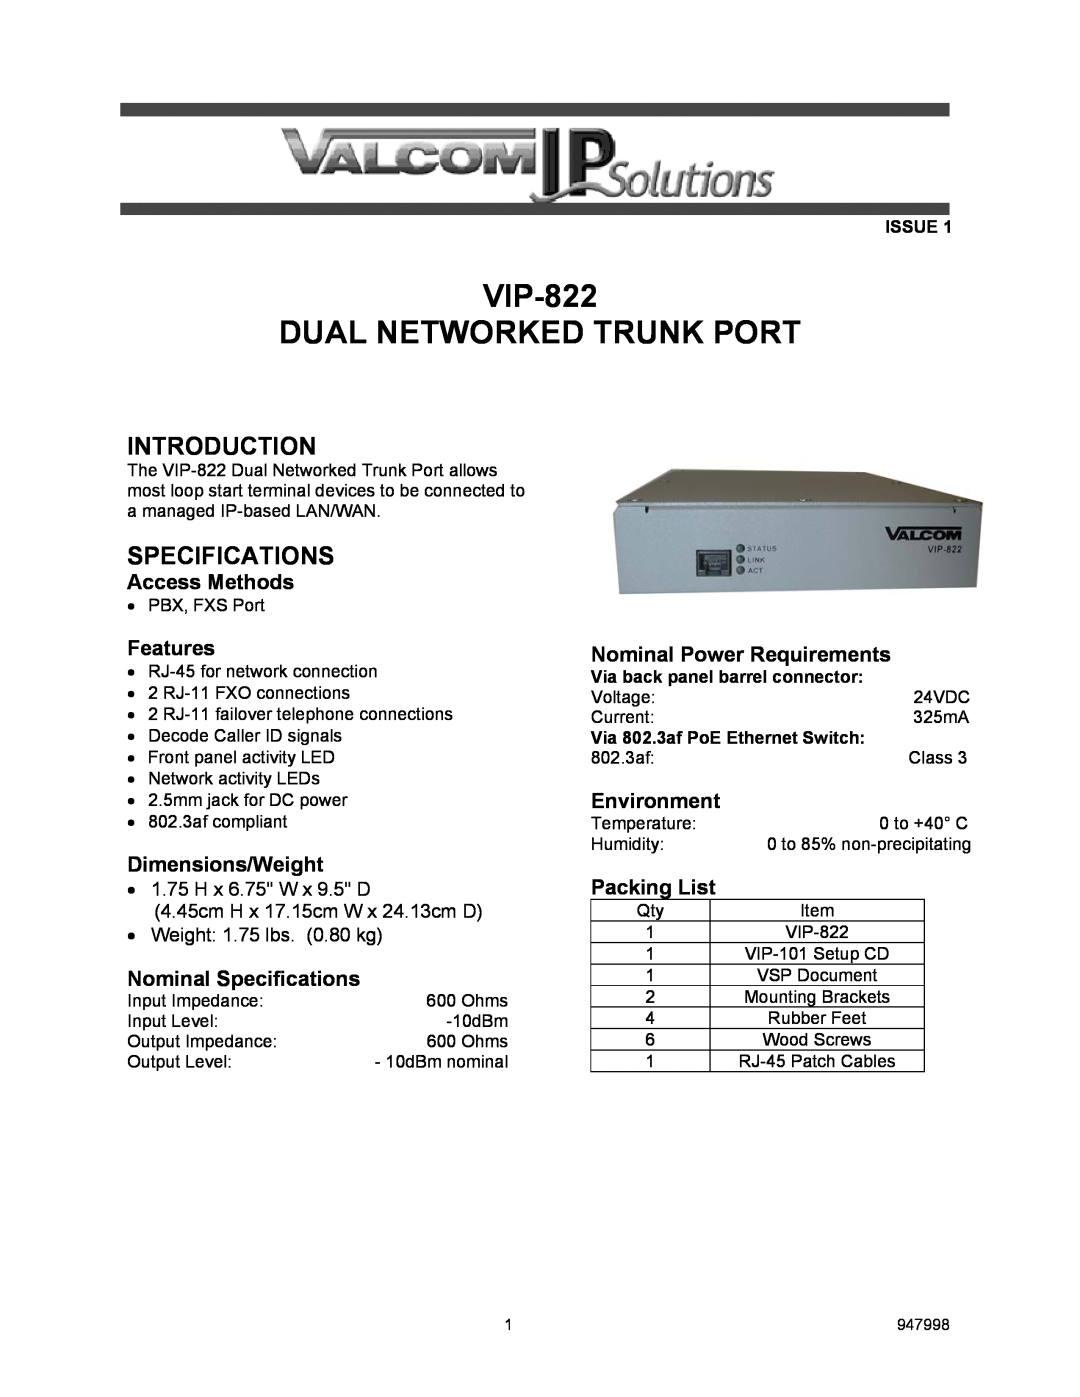 Valcom VIP-822 specifications Introduction, Specifications, Access Methods, Features, Dimensions/Weight, Environment 